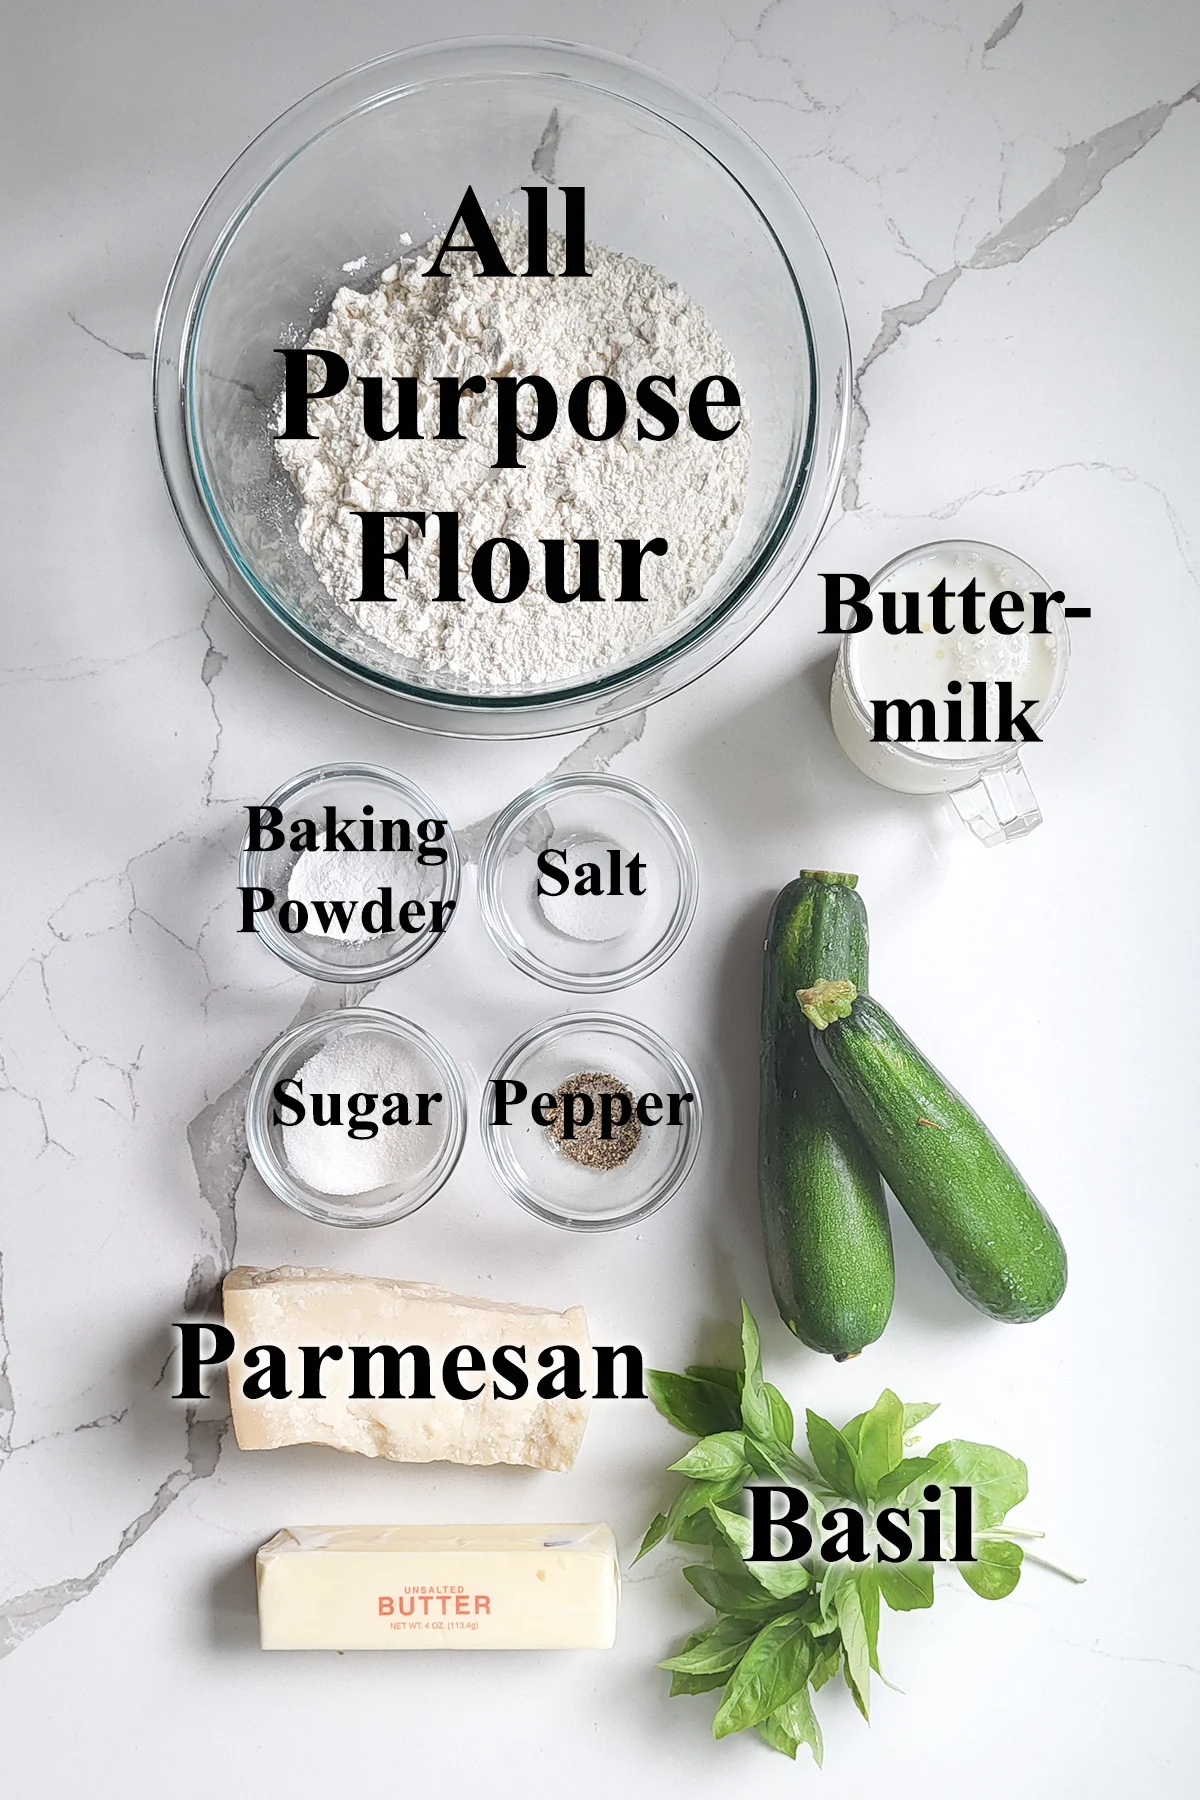 ingredients for making zucchini biscuits in glass bowls on a white surface.